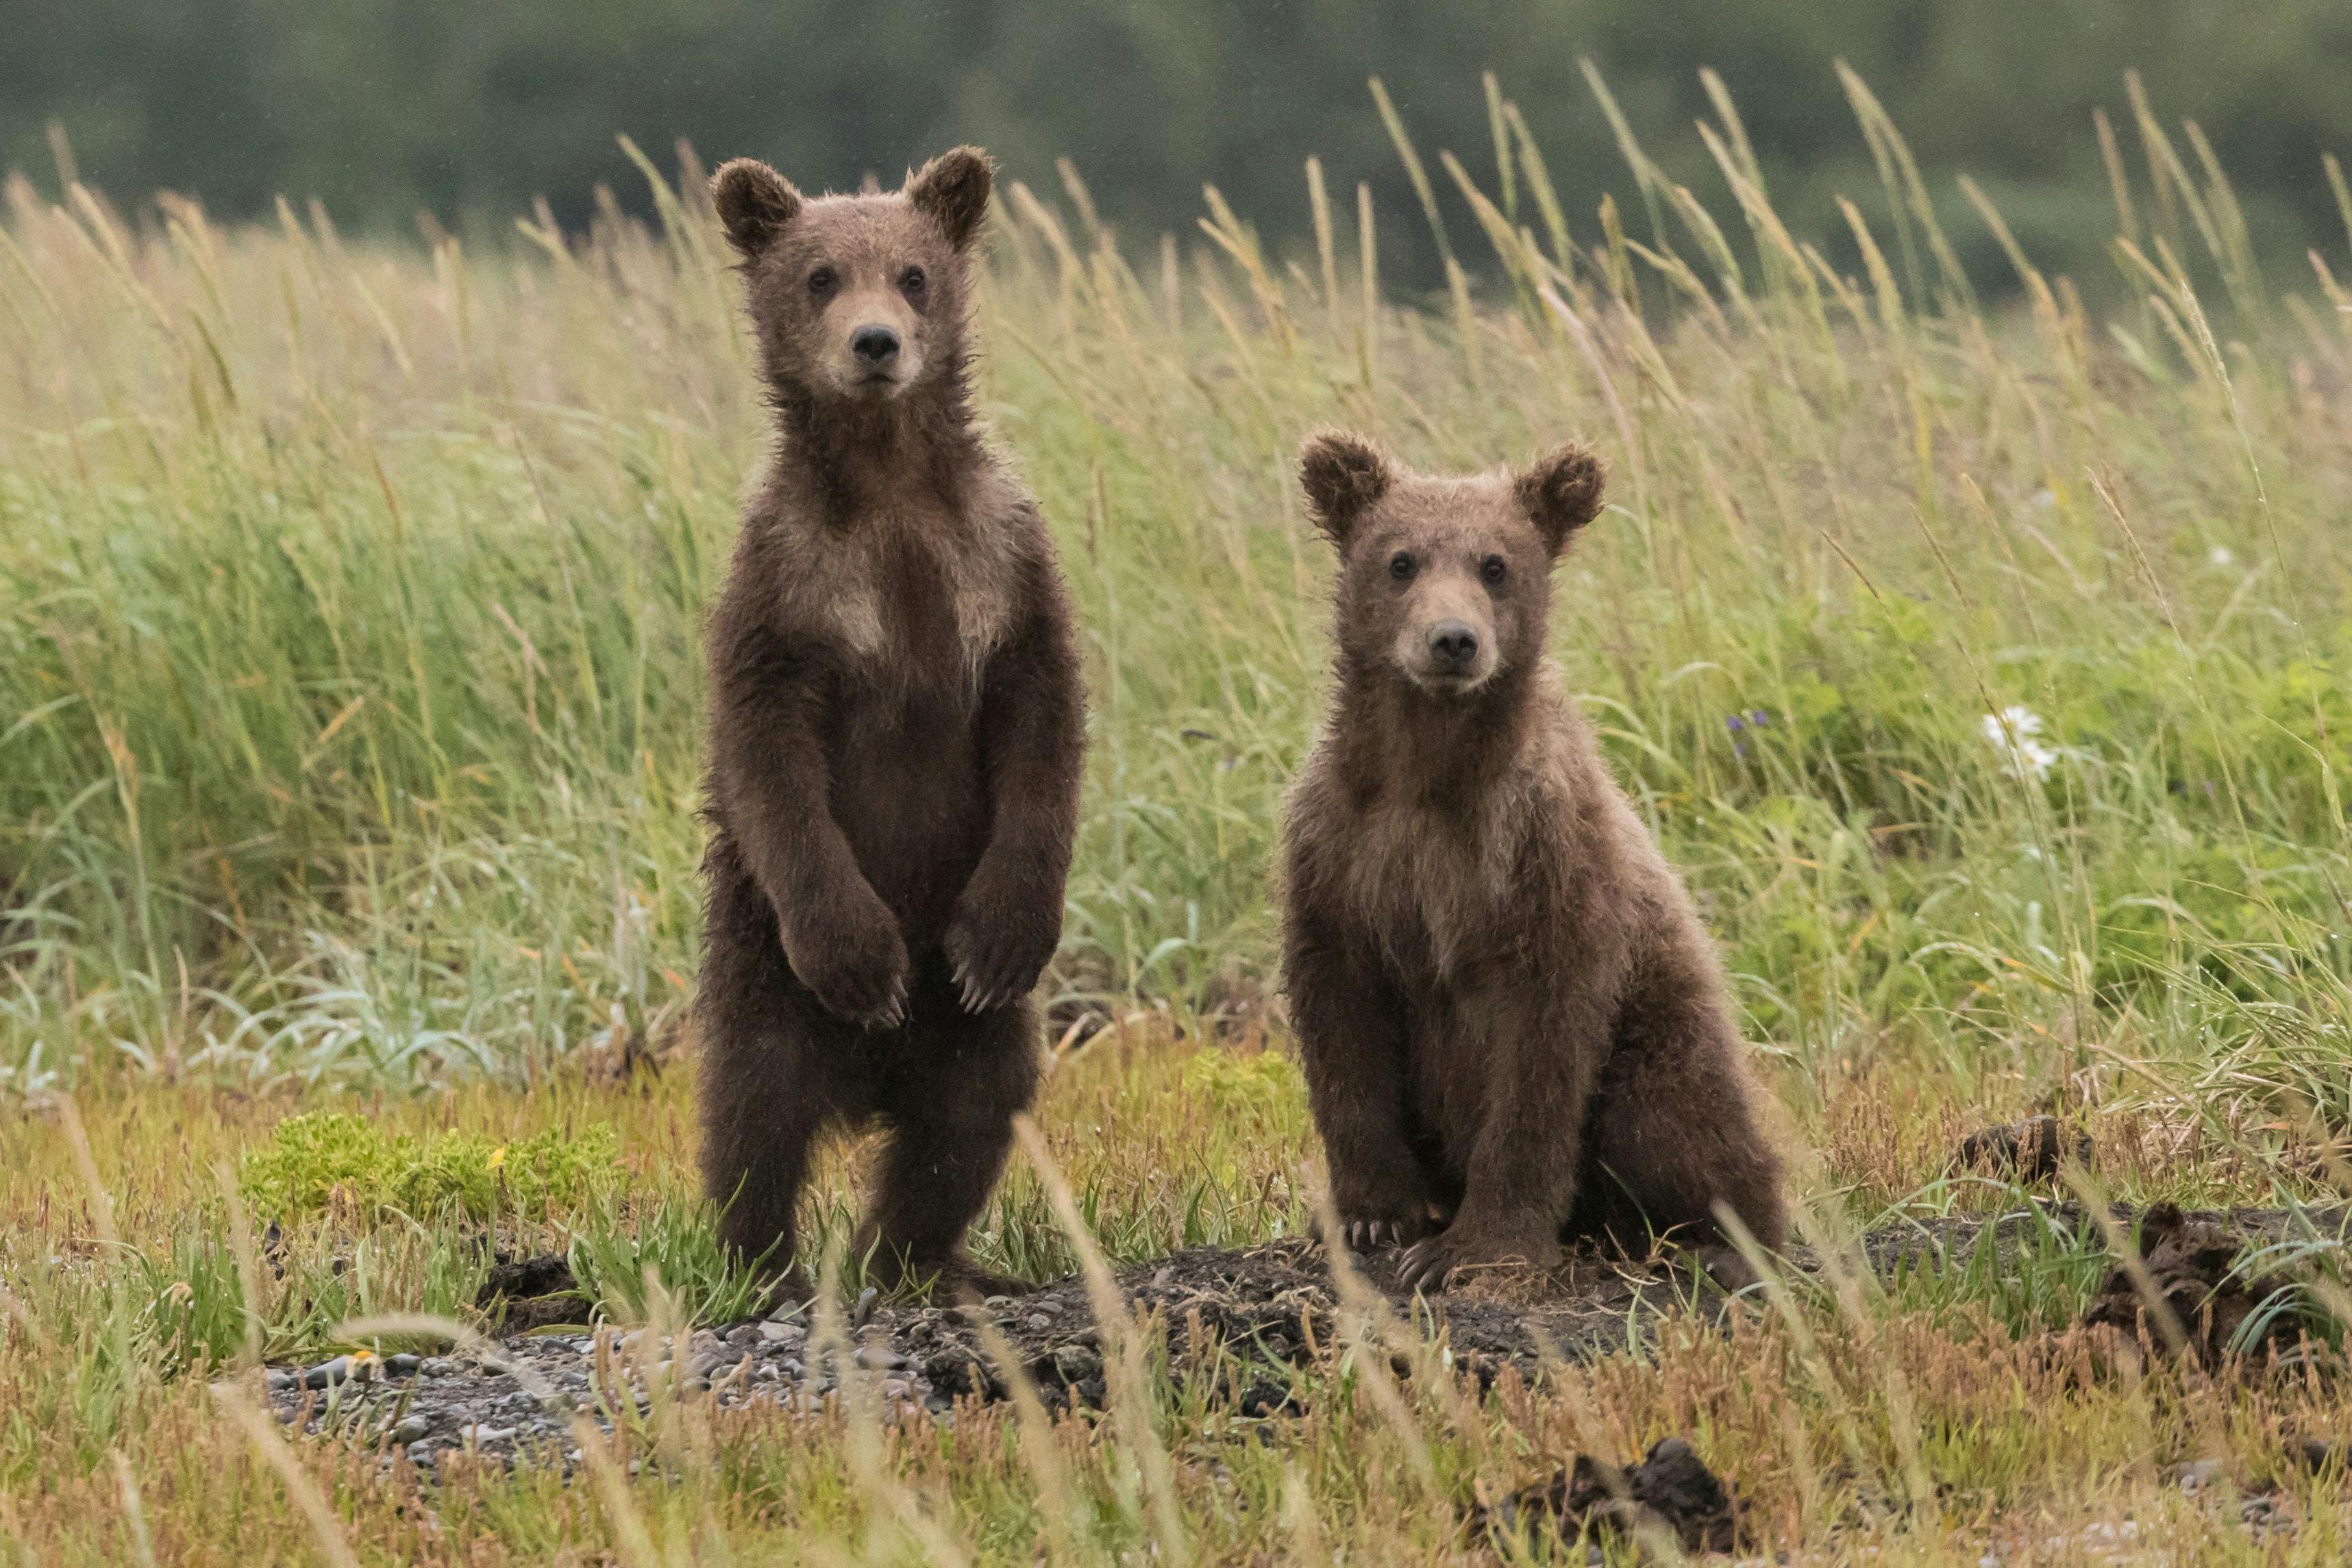 Two young bears in a field